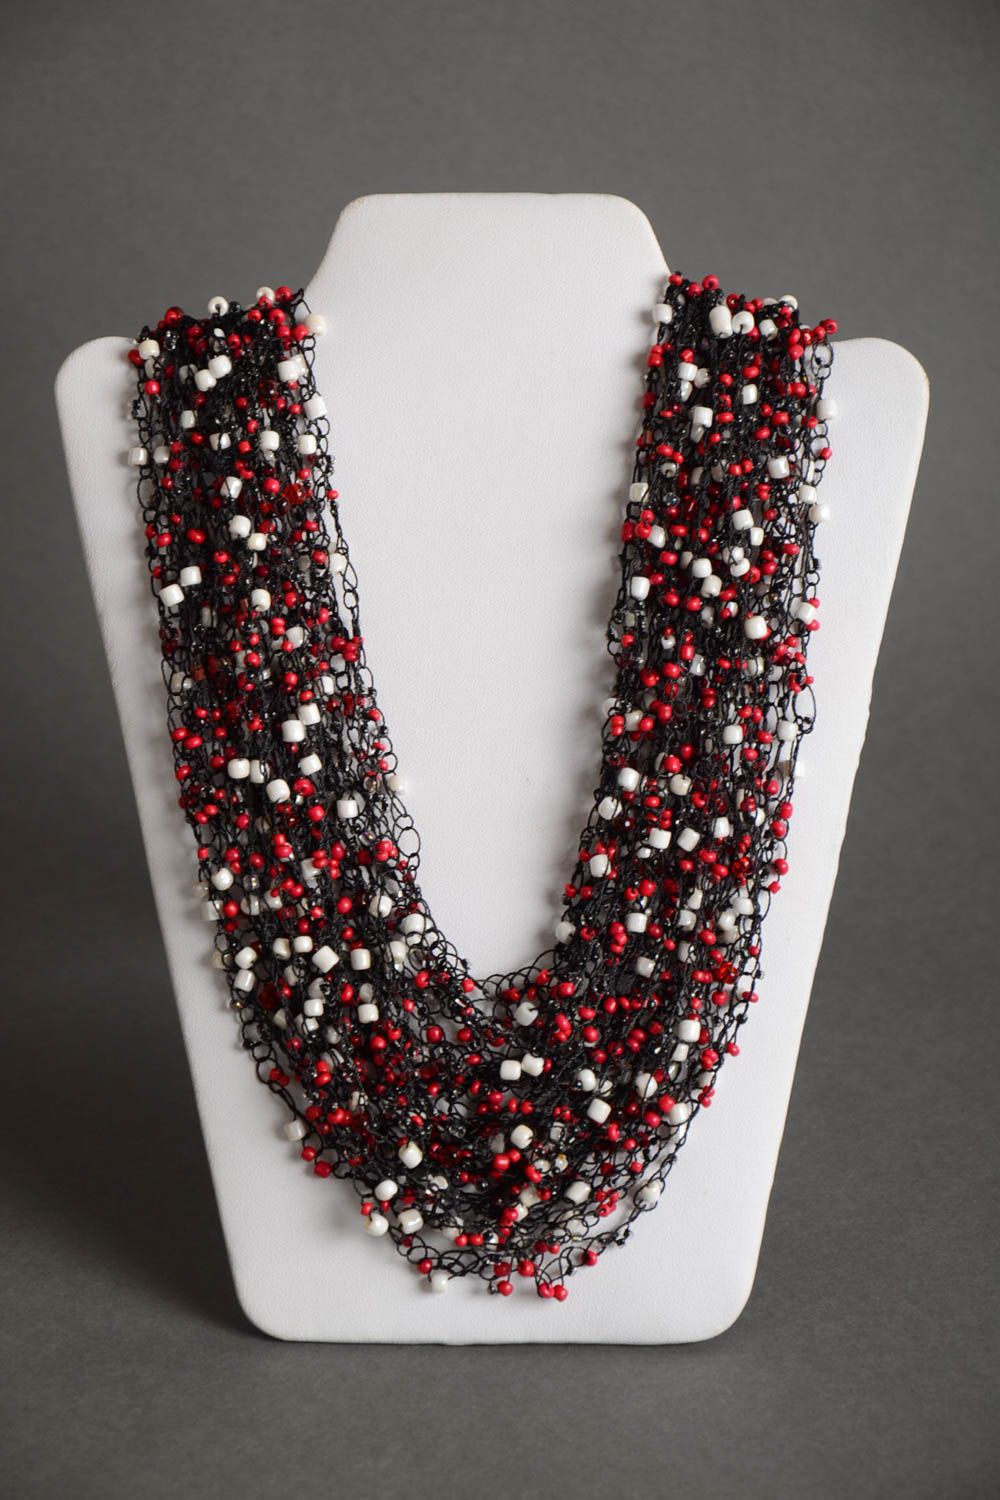 Handmade volume airy necklace crocheted of beads in white red and black colors photo 2